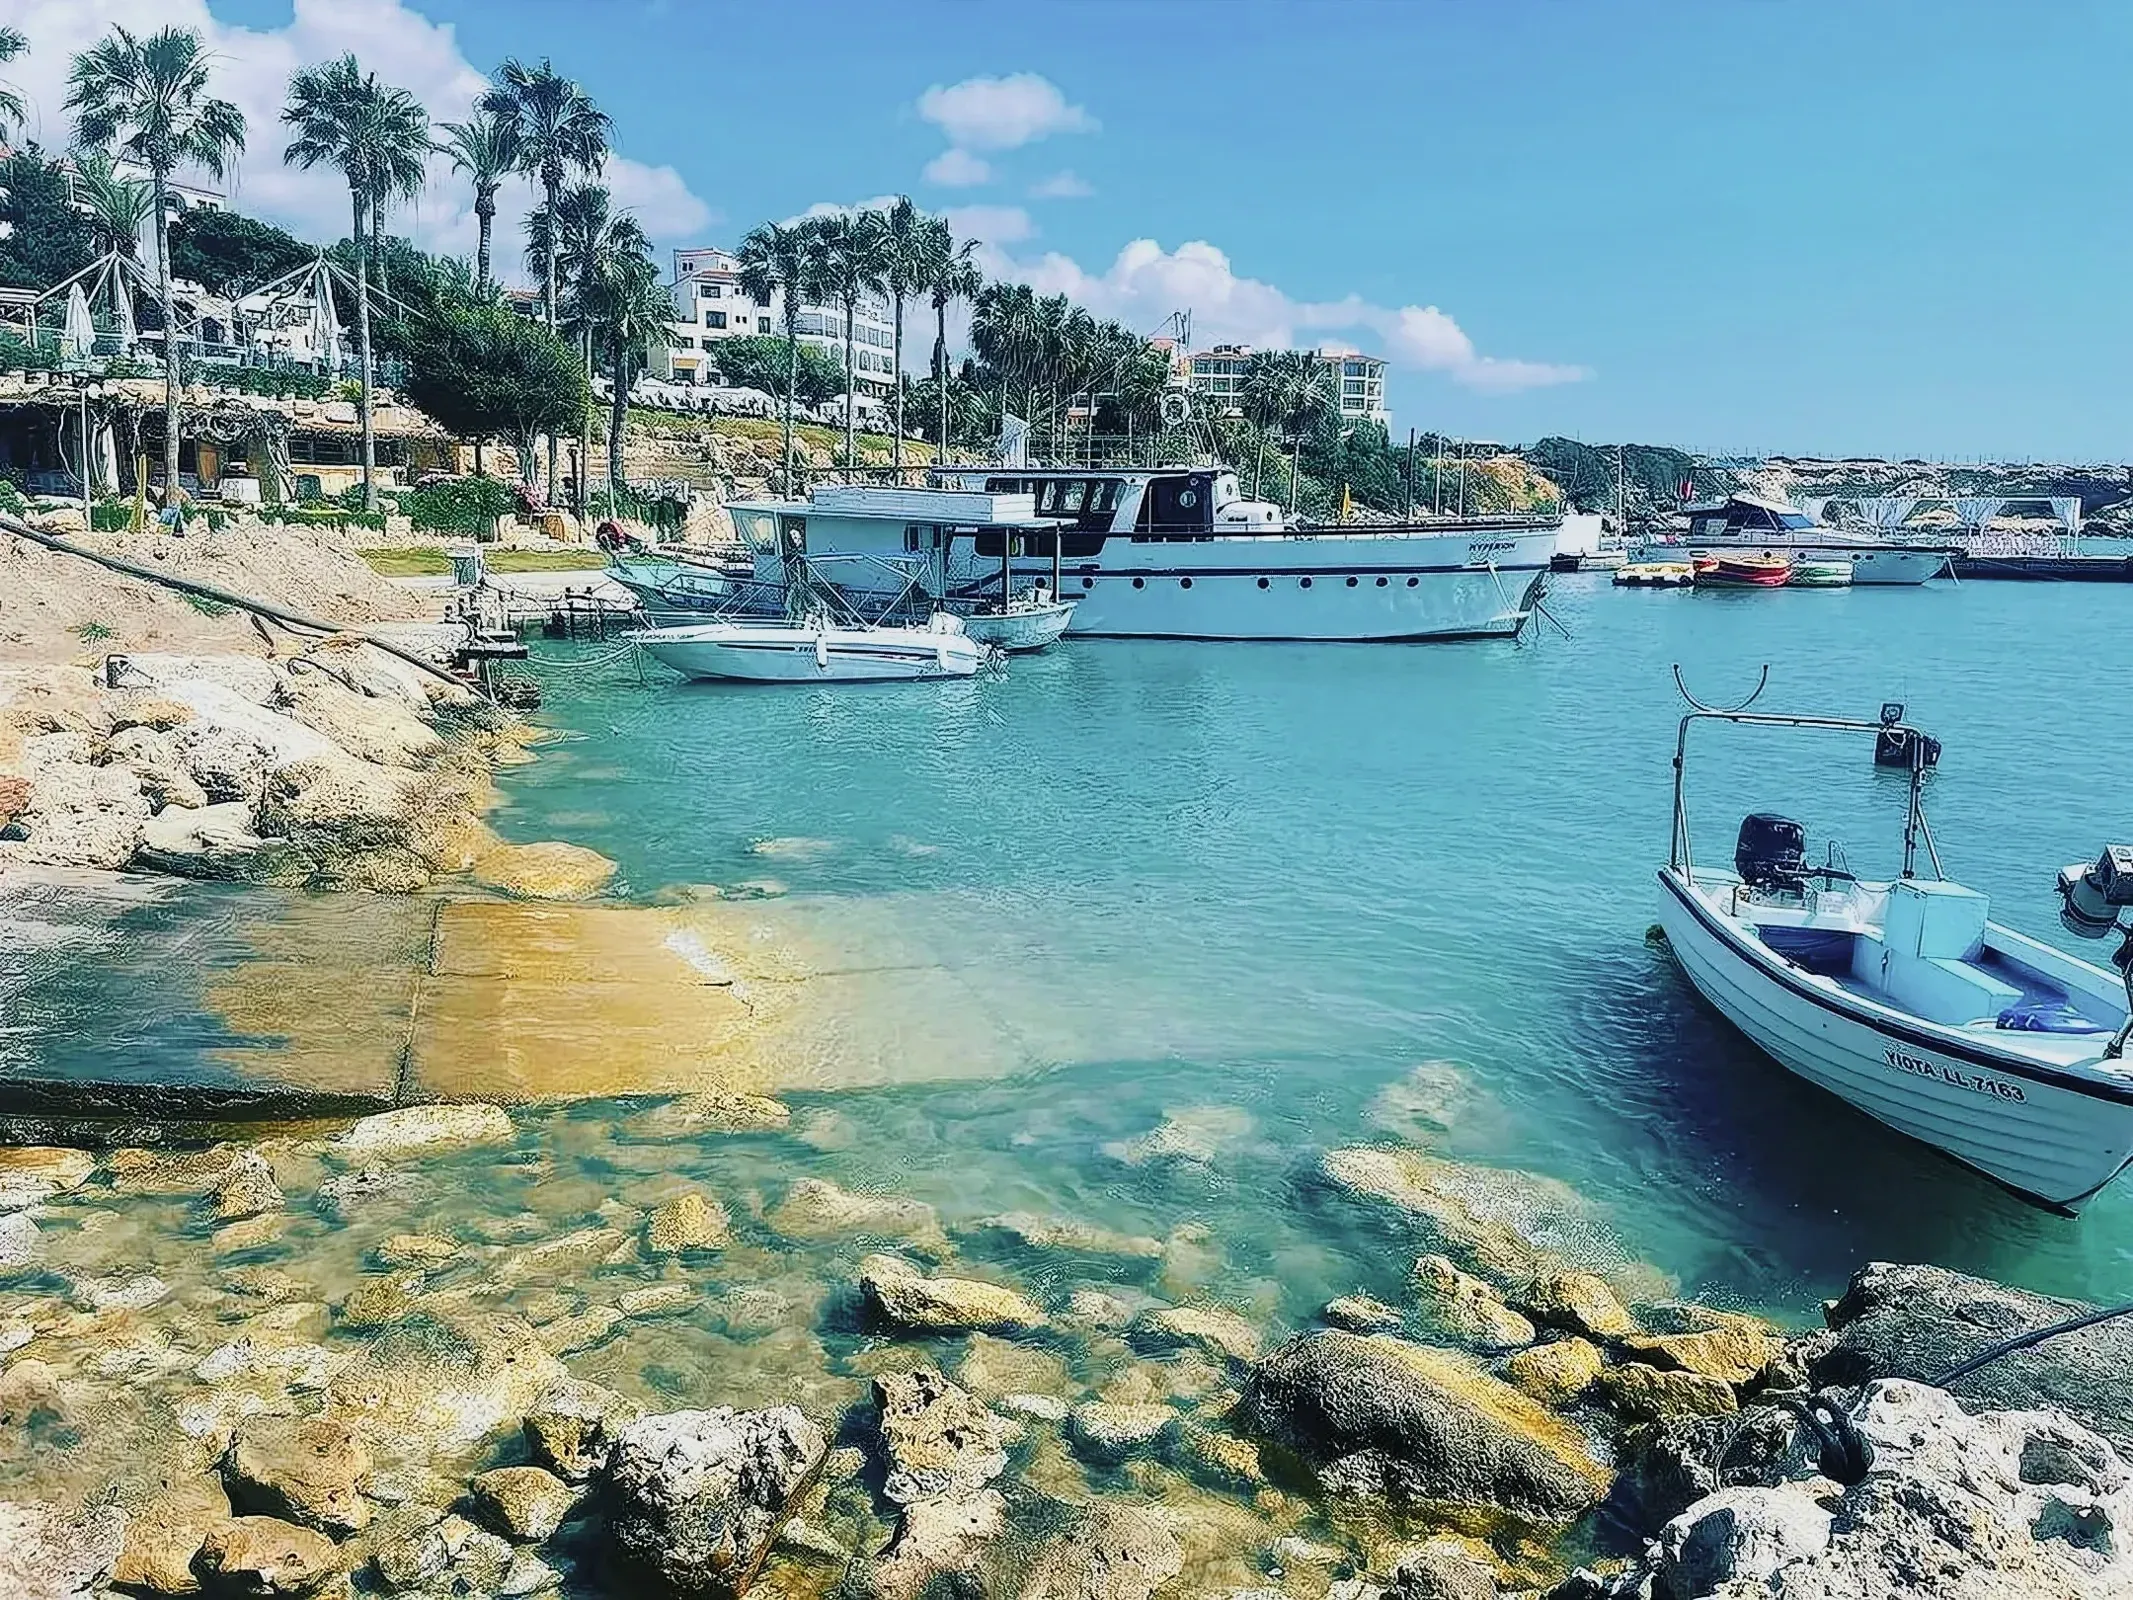 Captivating outdoor scene of boats in Coral Bay, Cyprus